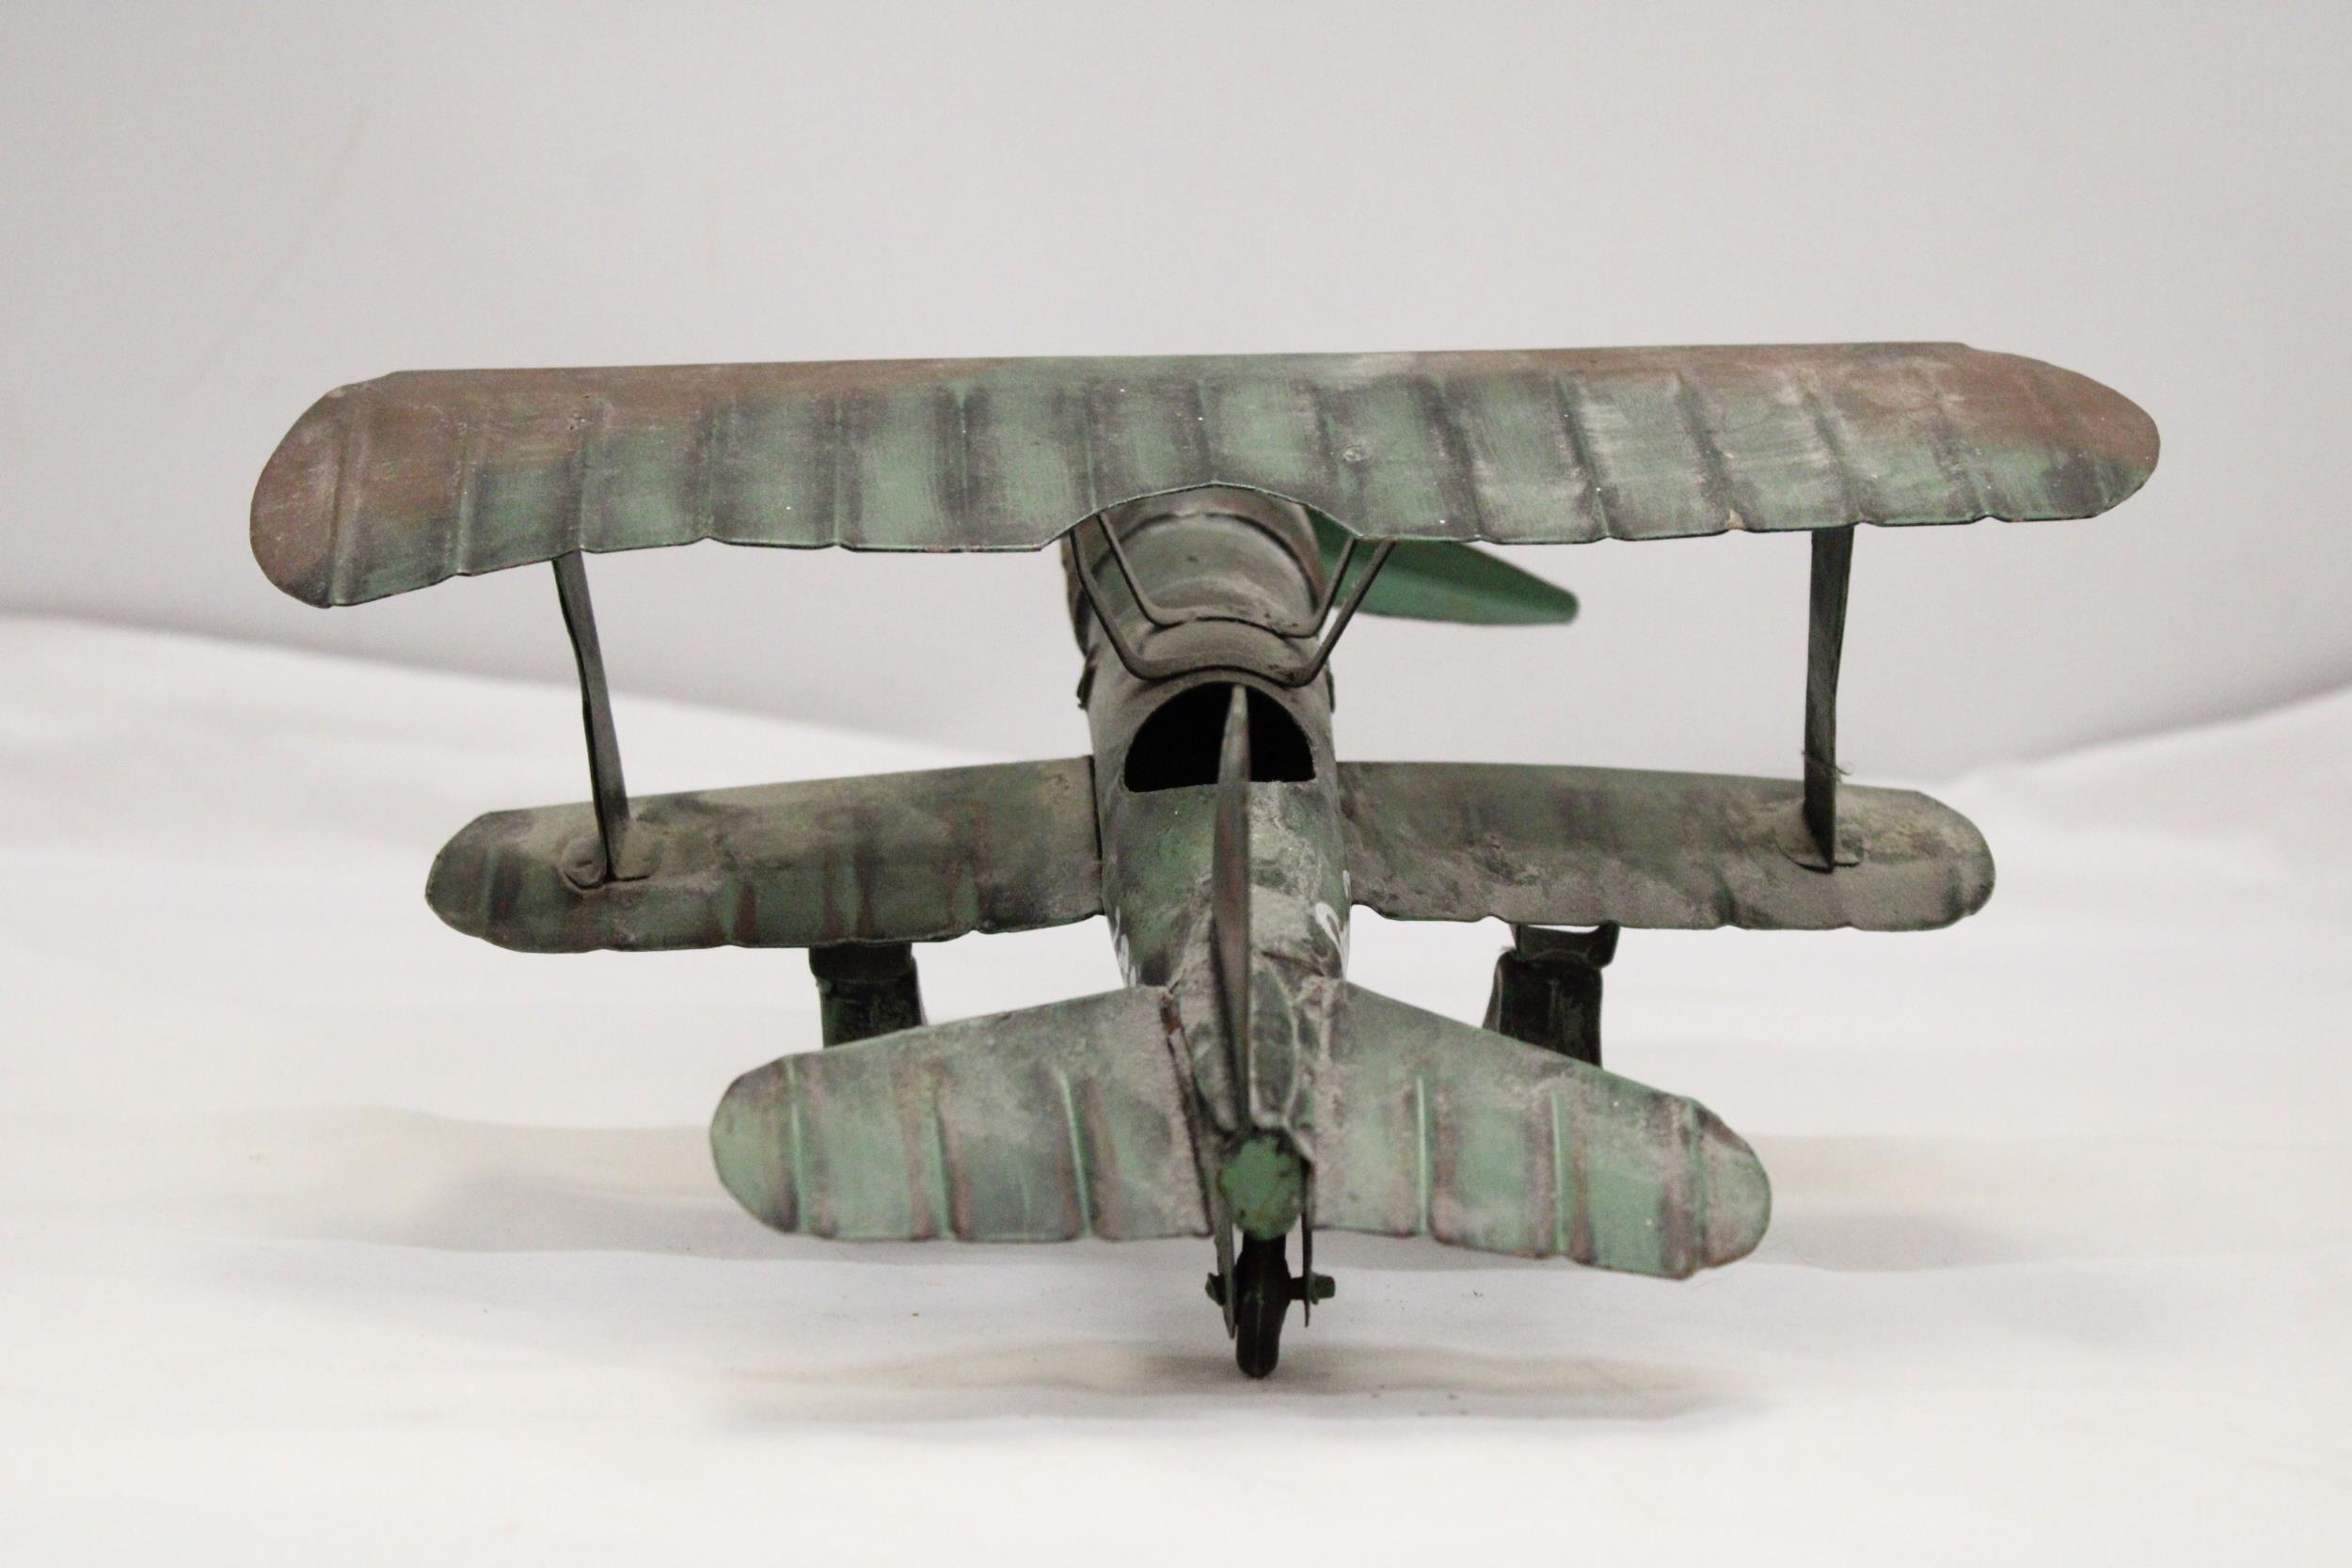 A U.S.A TIN PLATE BI-PLANE APPROXIMATELY 13CM HIGH BY 23CM LONG - Image 3 of 5